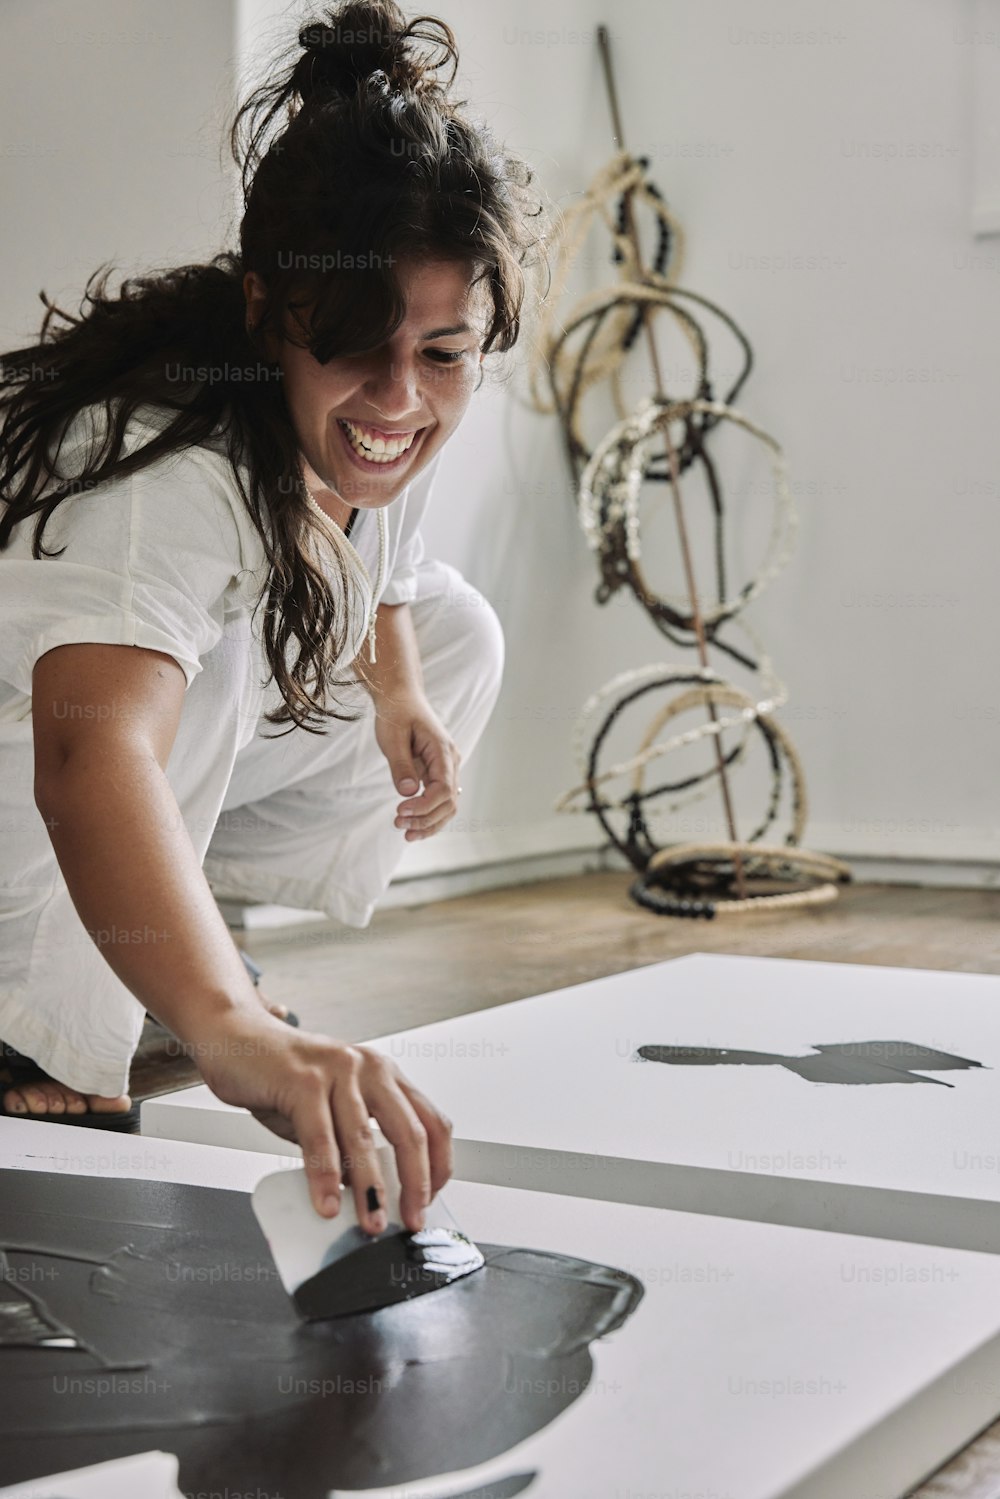 a woman is smiling while working on a piece of art